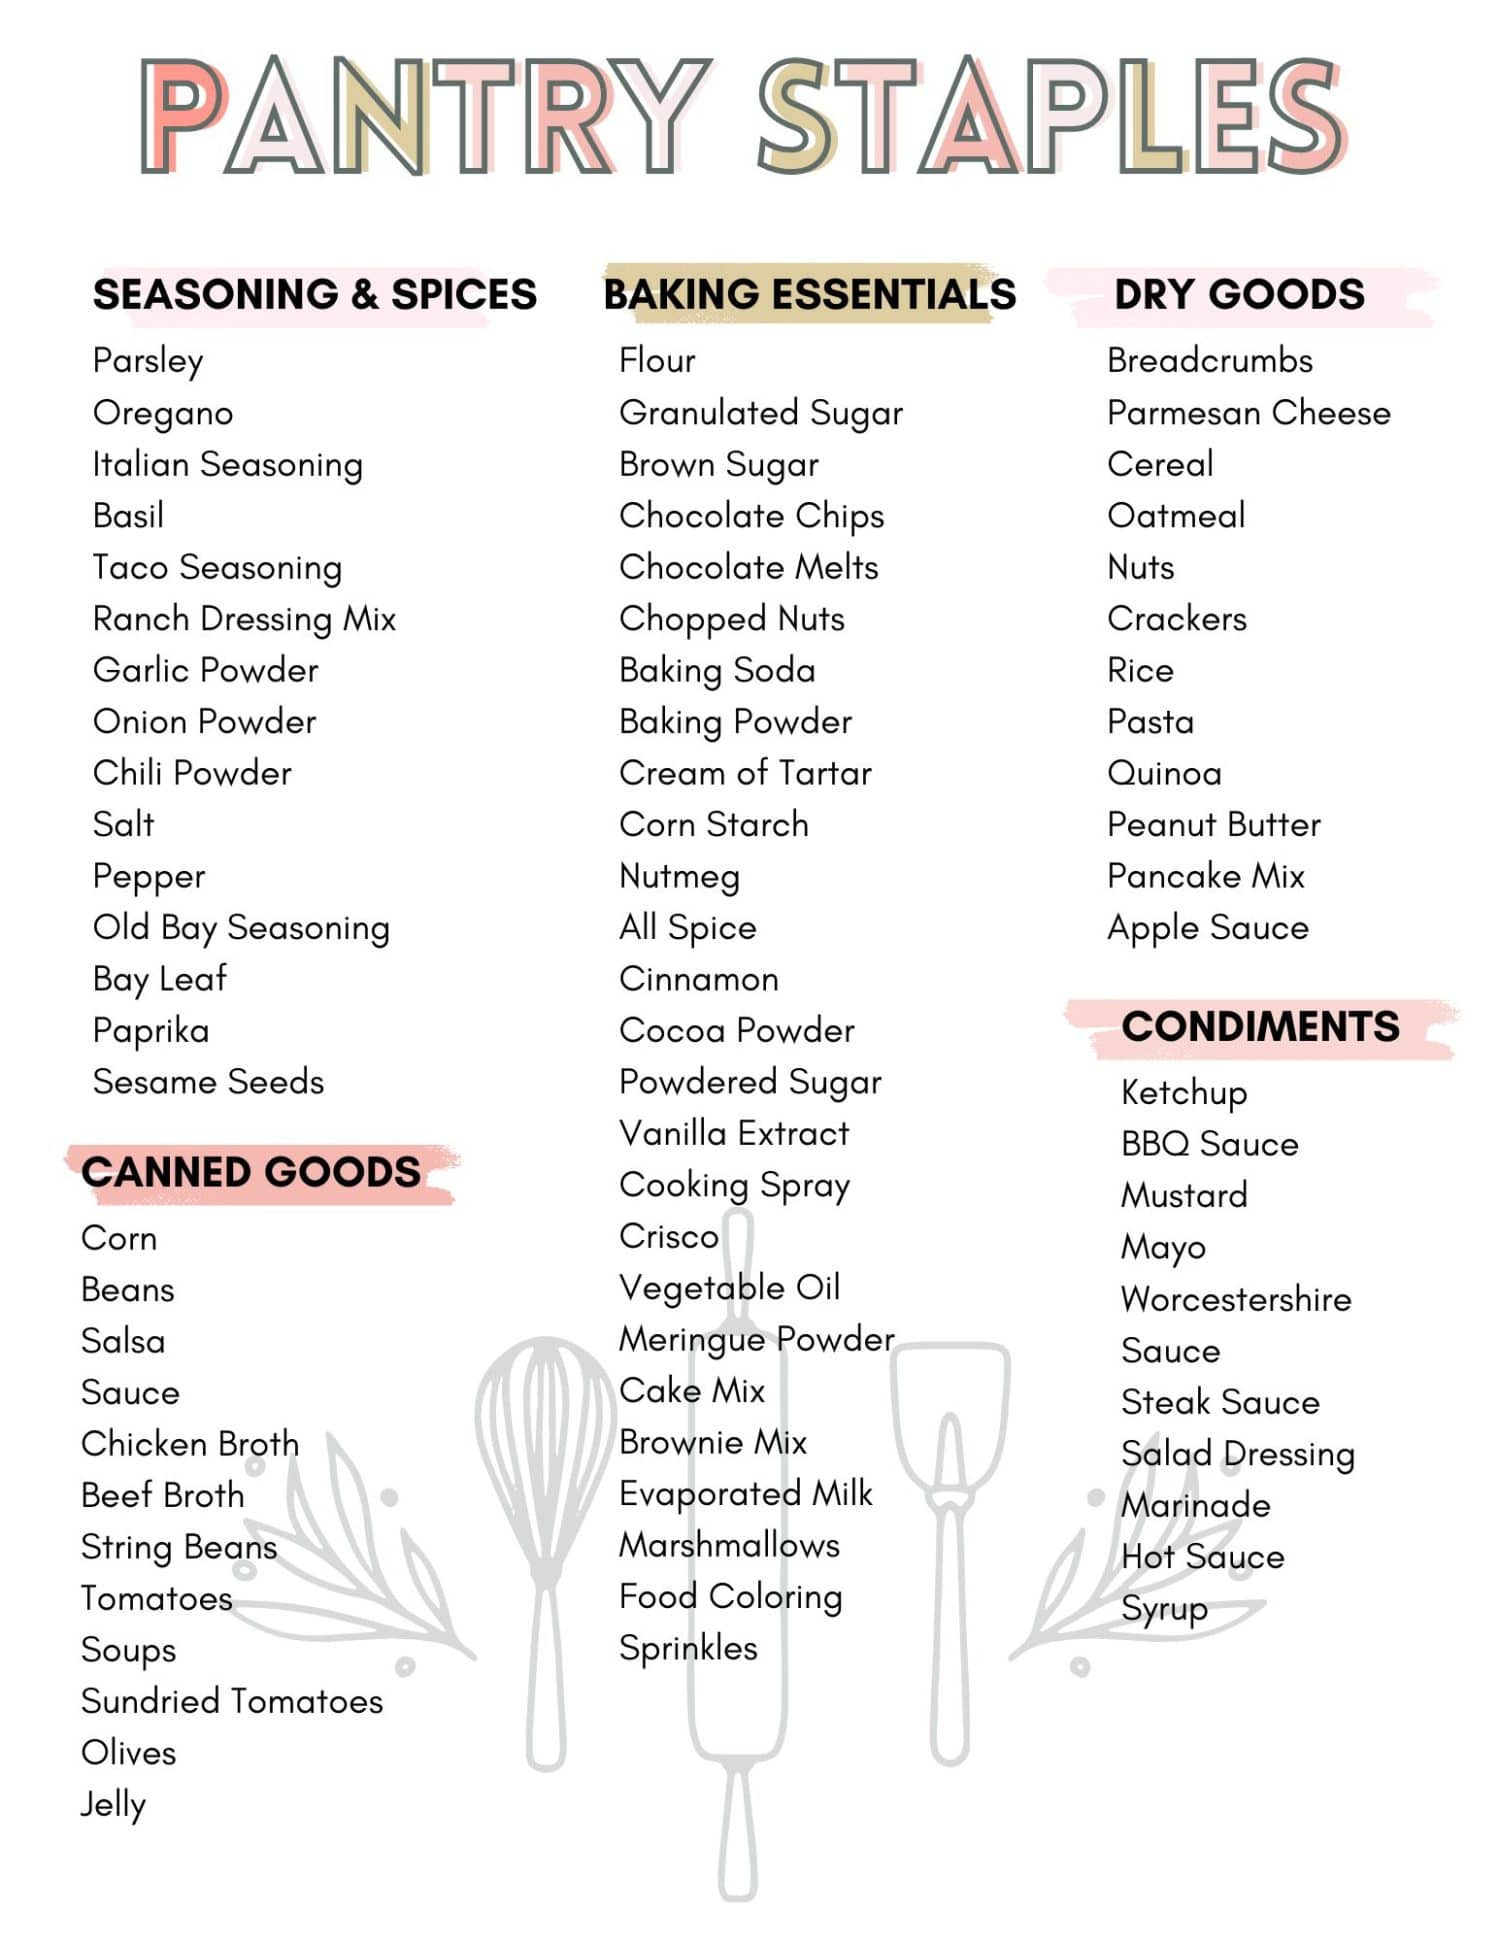 List of pantry staples like seasoning and spices, baking essentials, dry goods and more